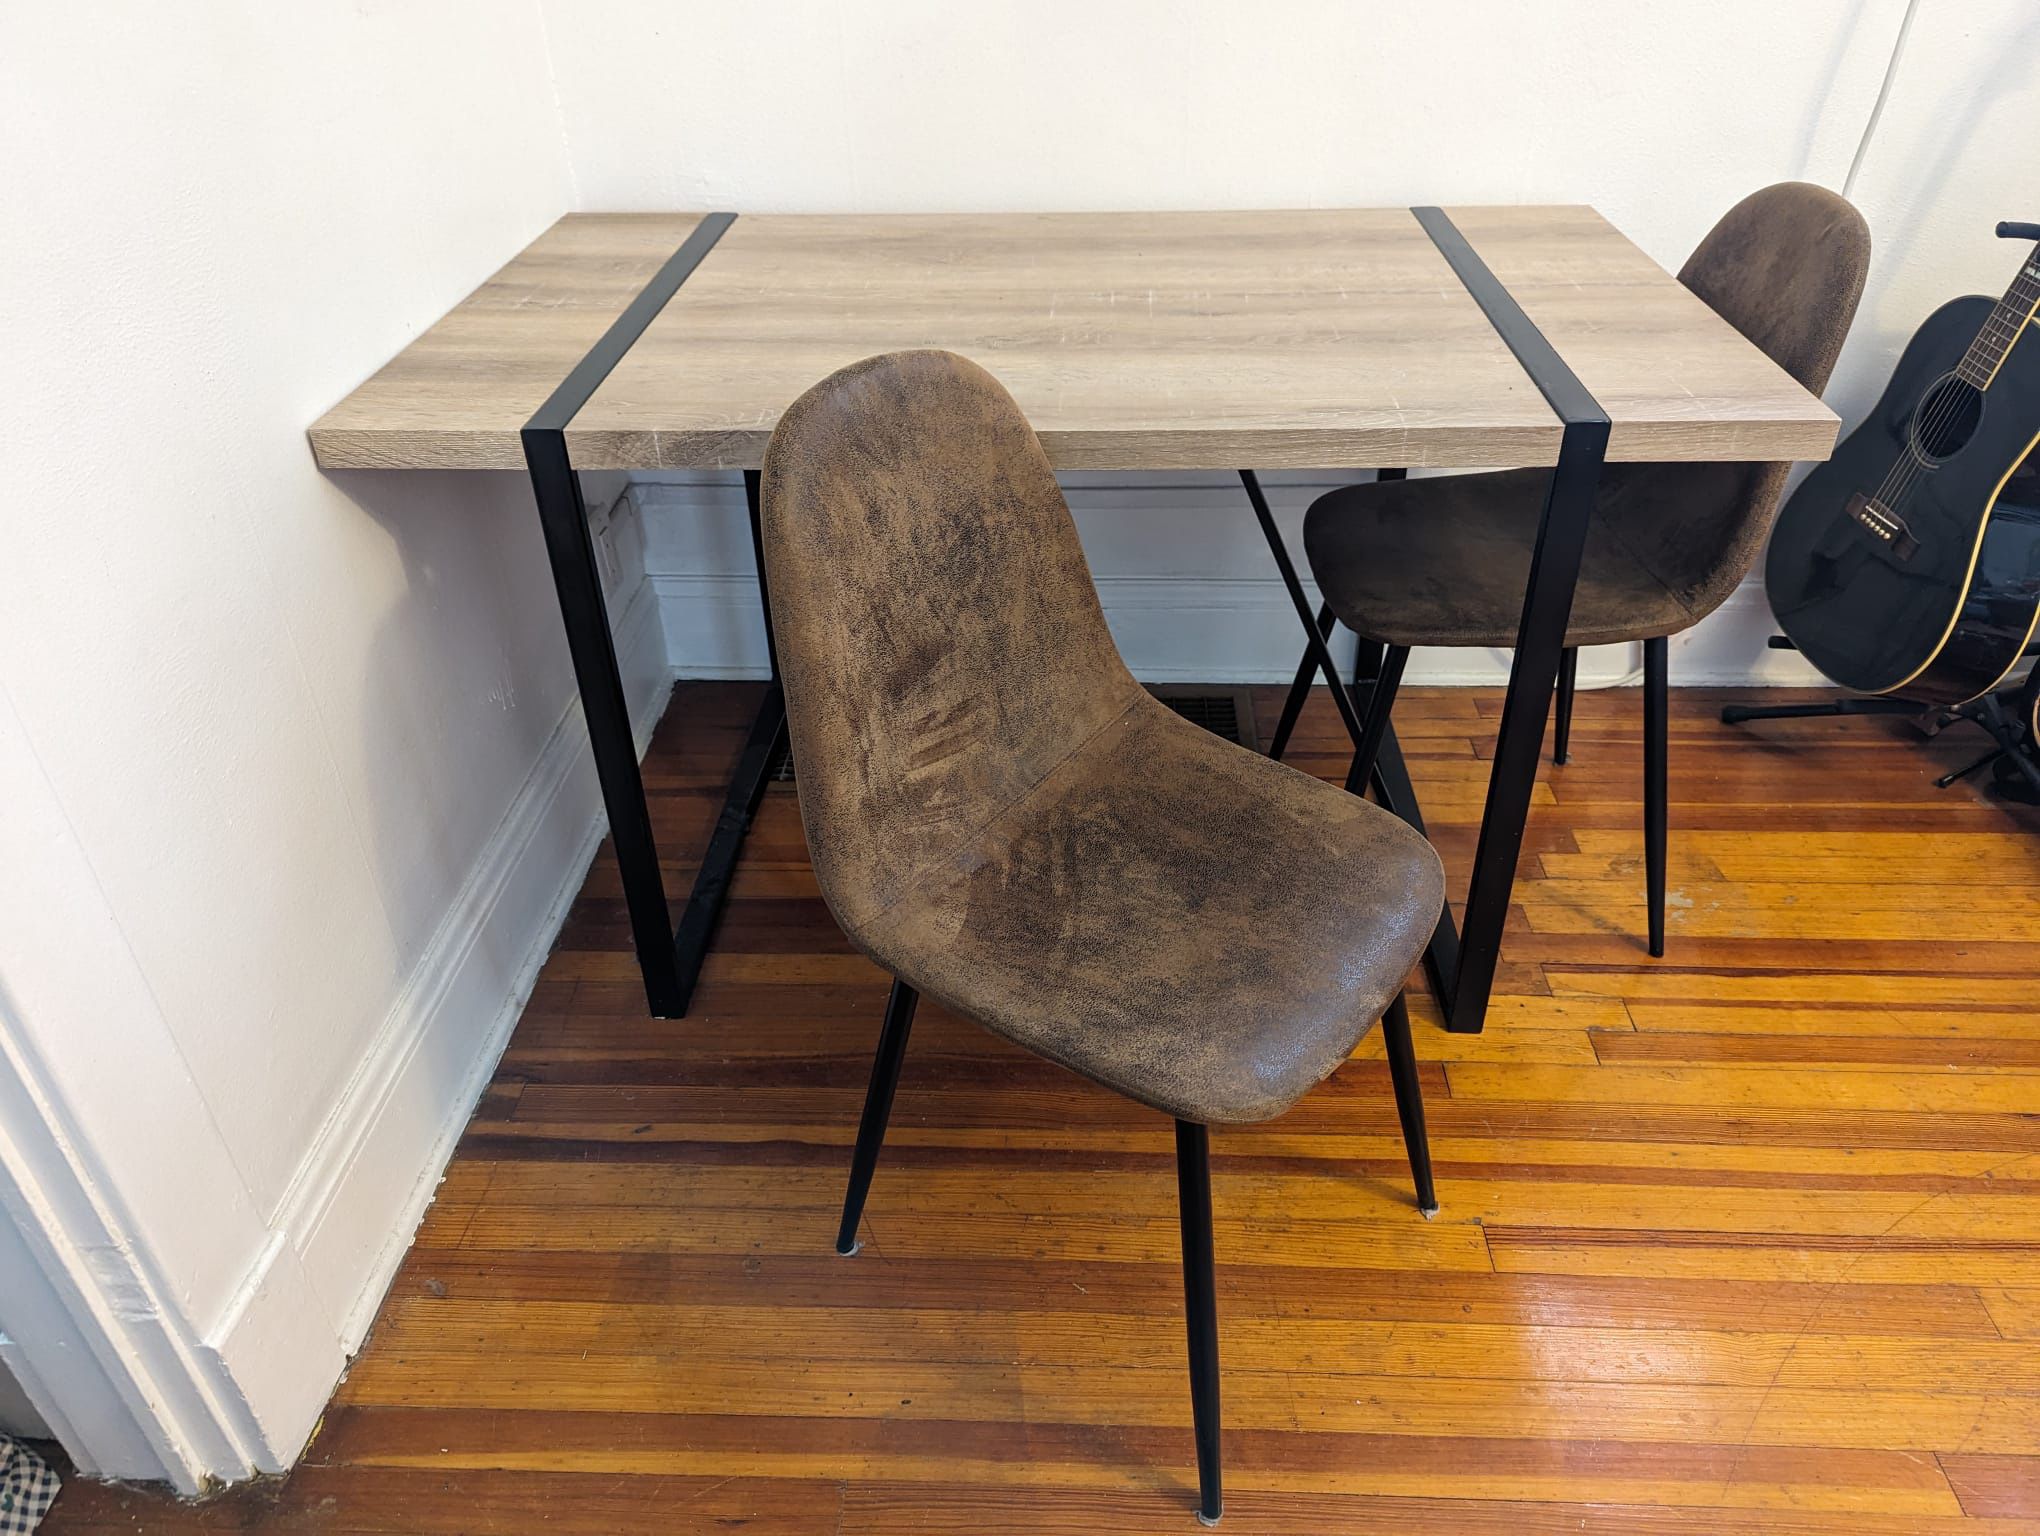 Wooden Dining Table With 4 Chairs